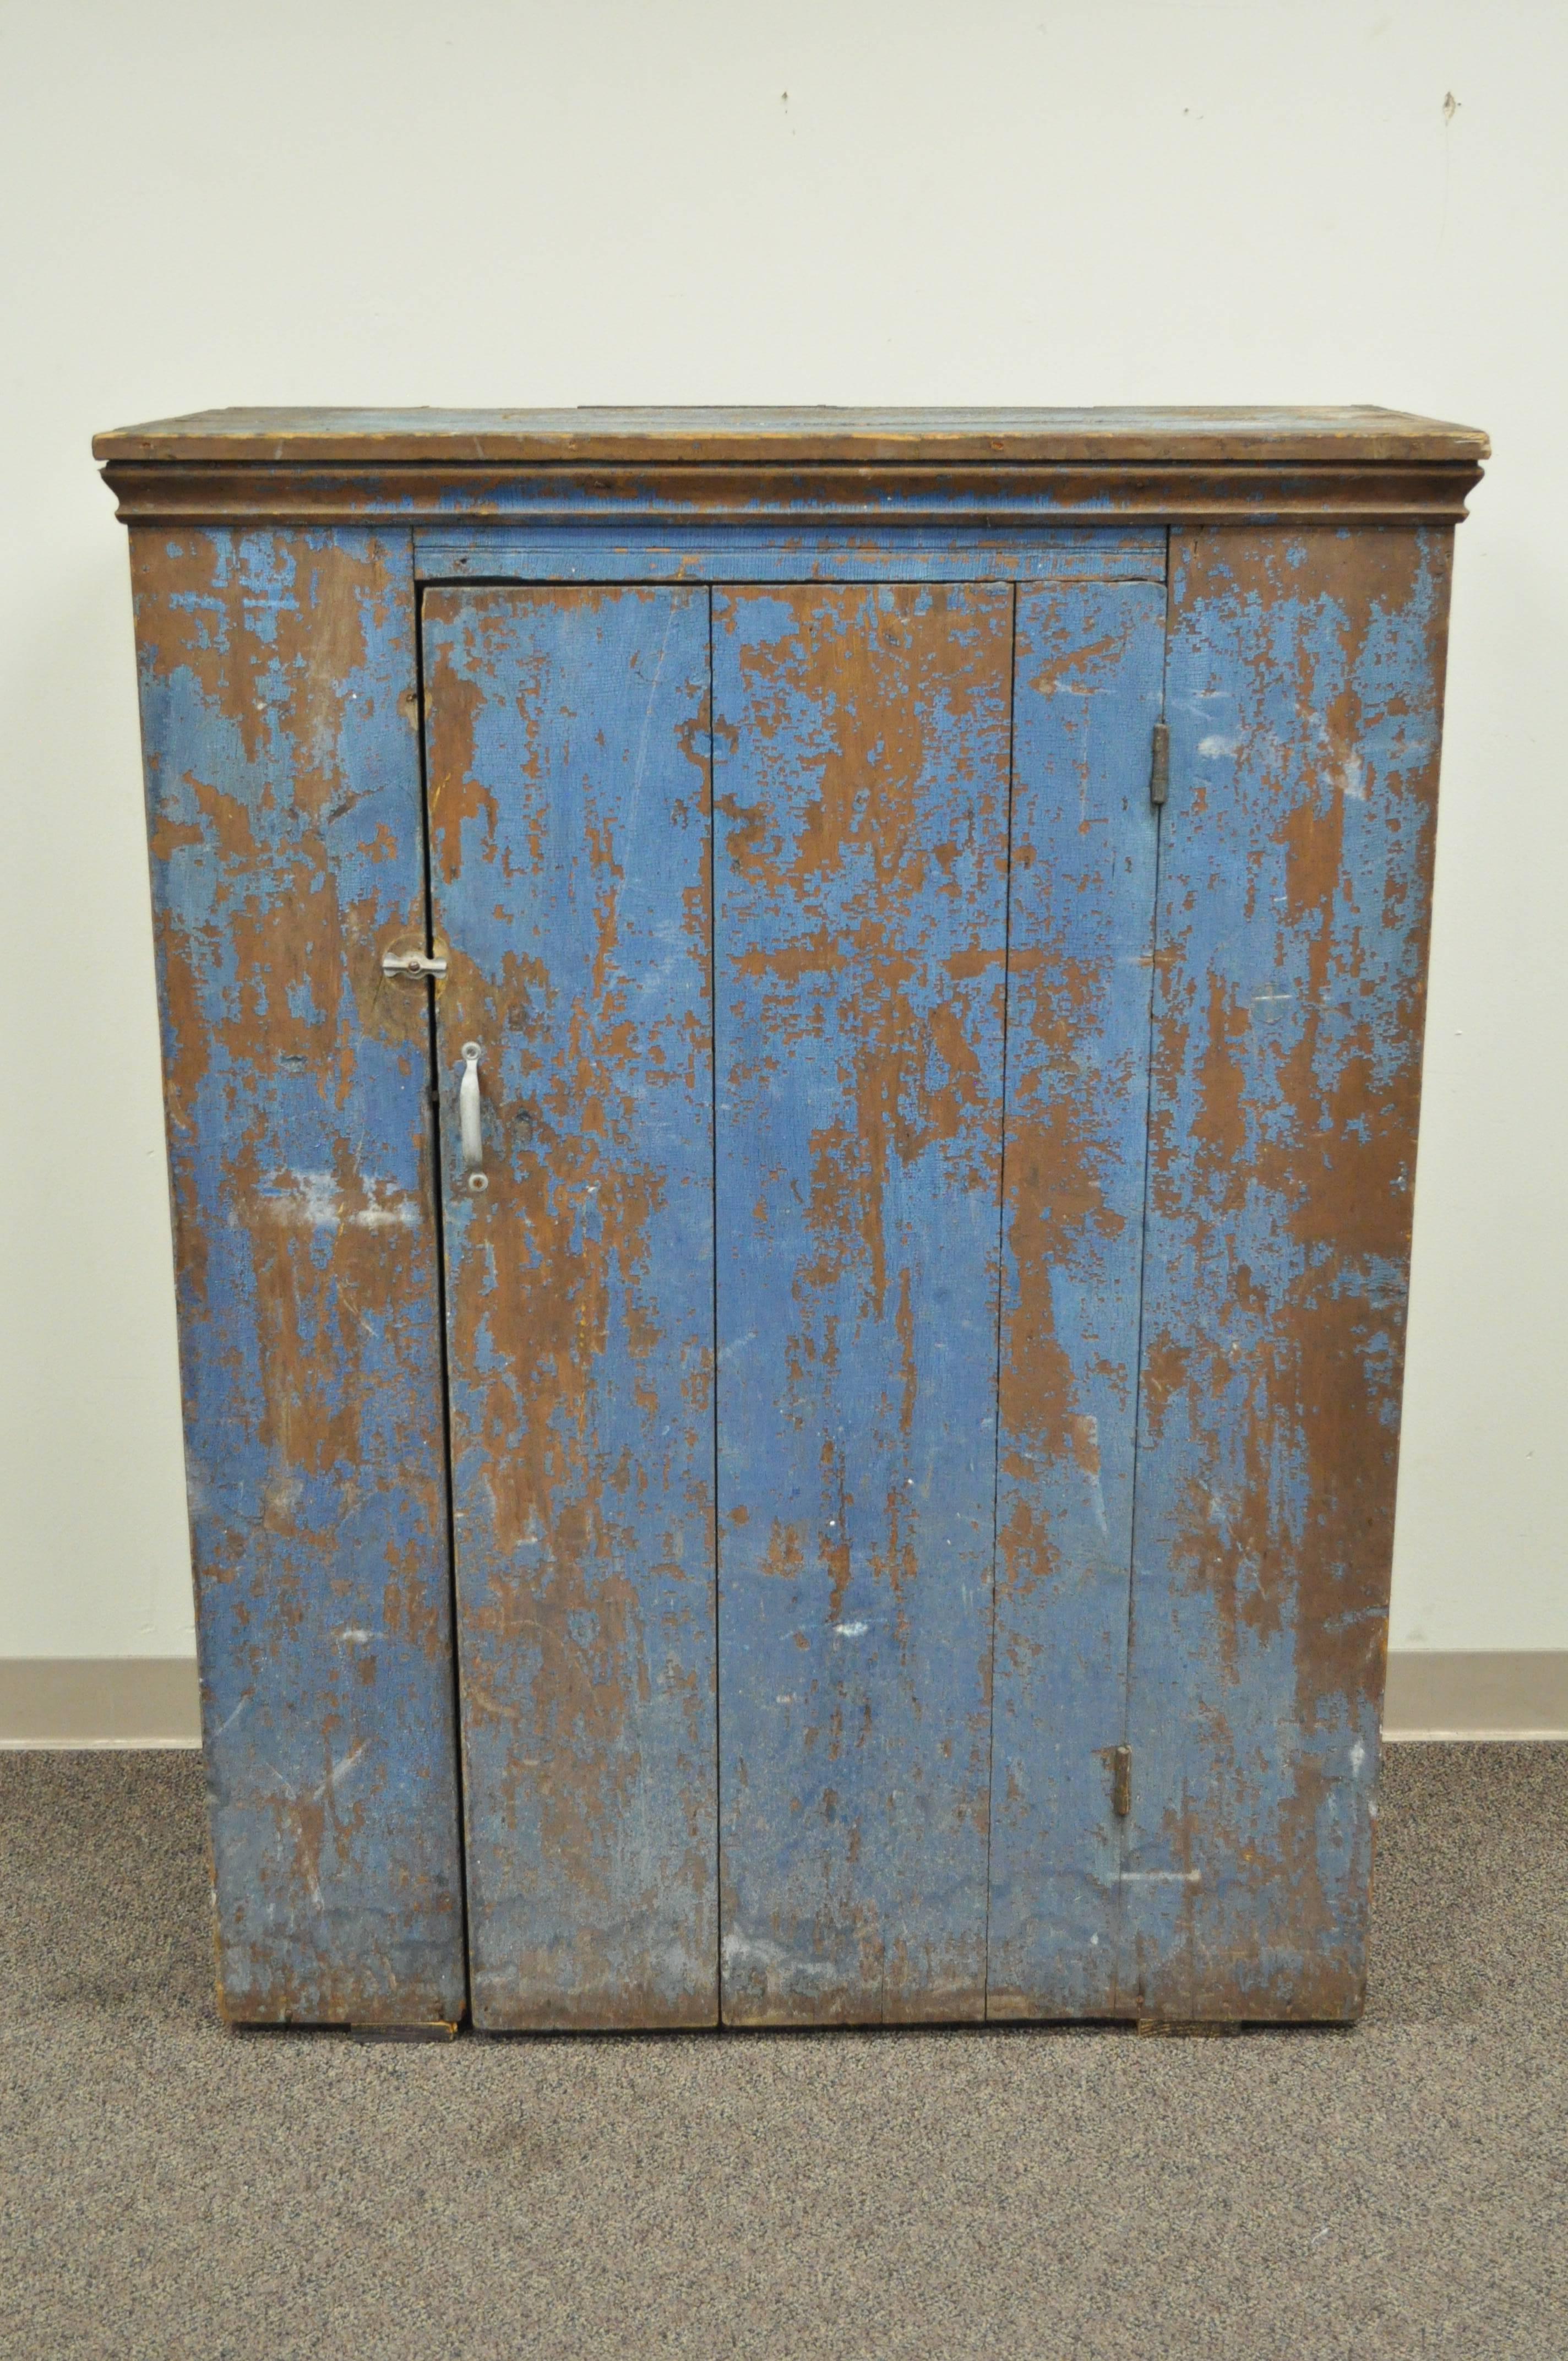 Charming early 19th century weathered and distressed handmade jelly cupboard with original blue painted finish from Pennsylvania Dutch Country. Item features solid wood construction, single swing door, three interior shelves, and desirable and